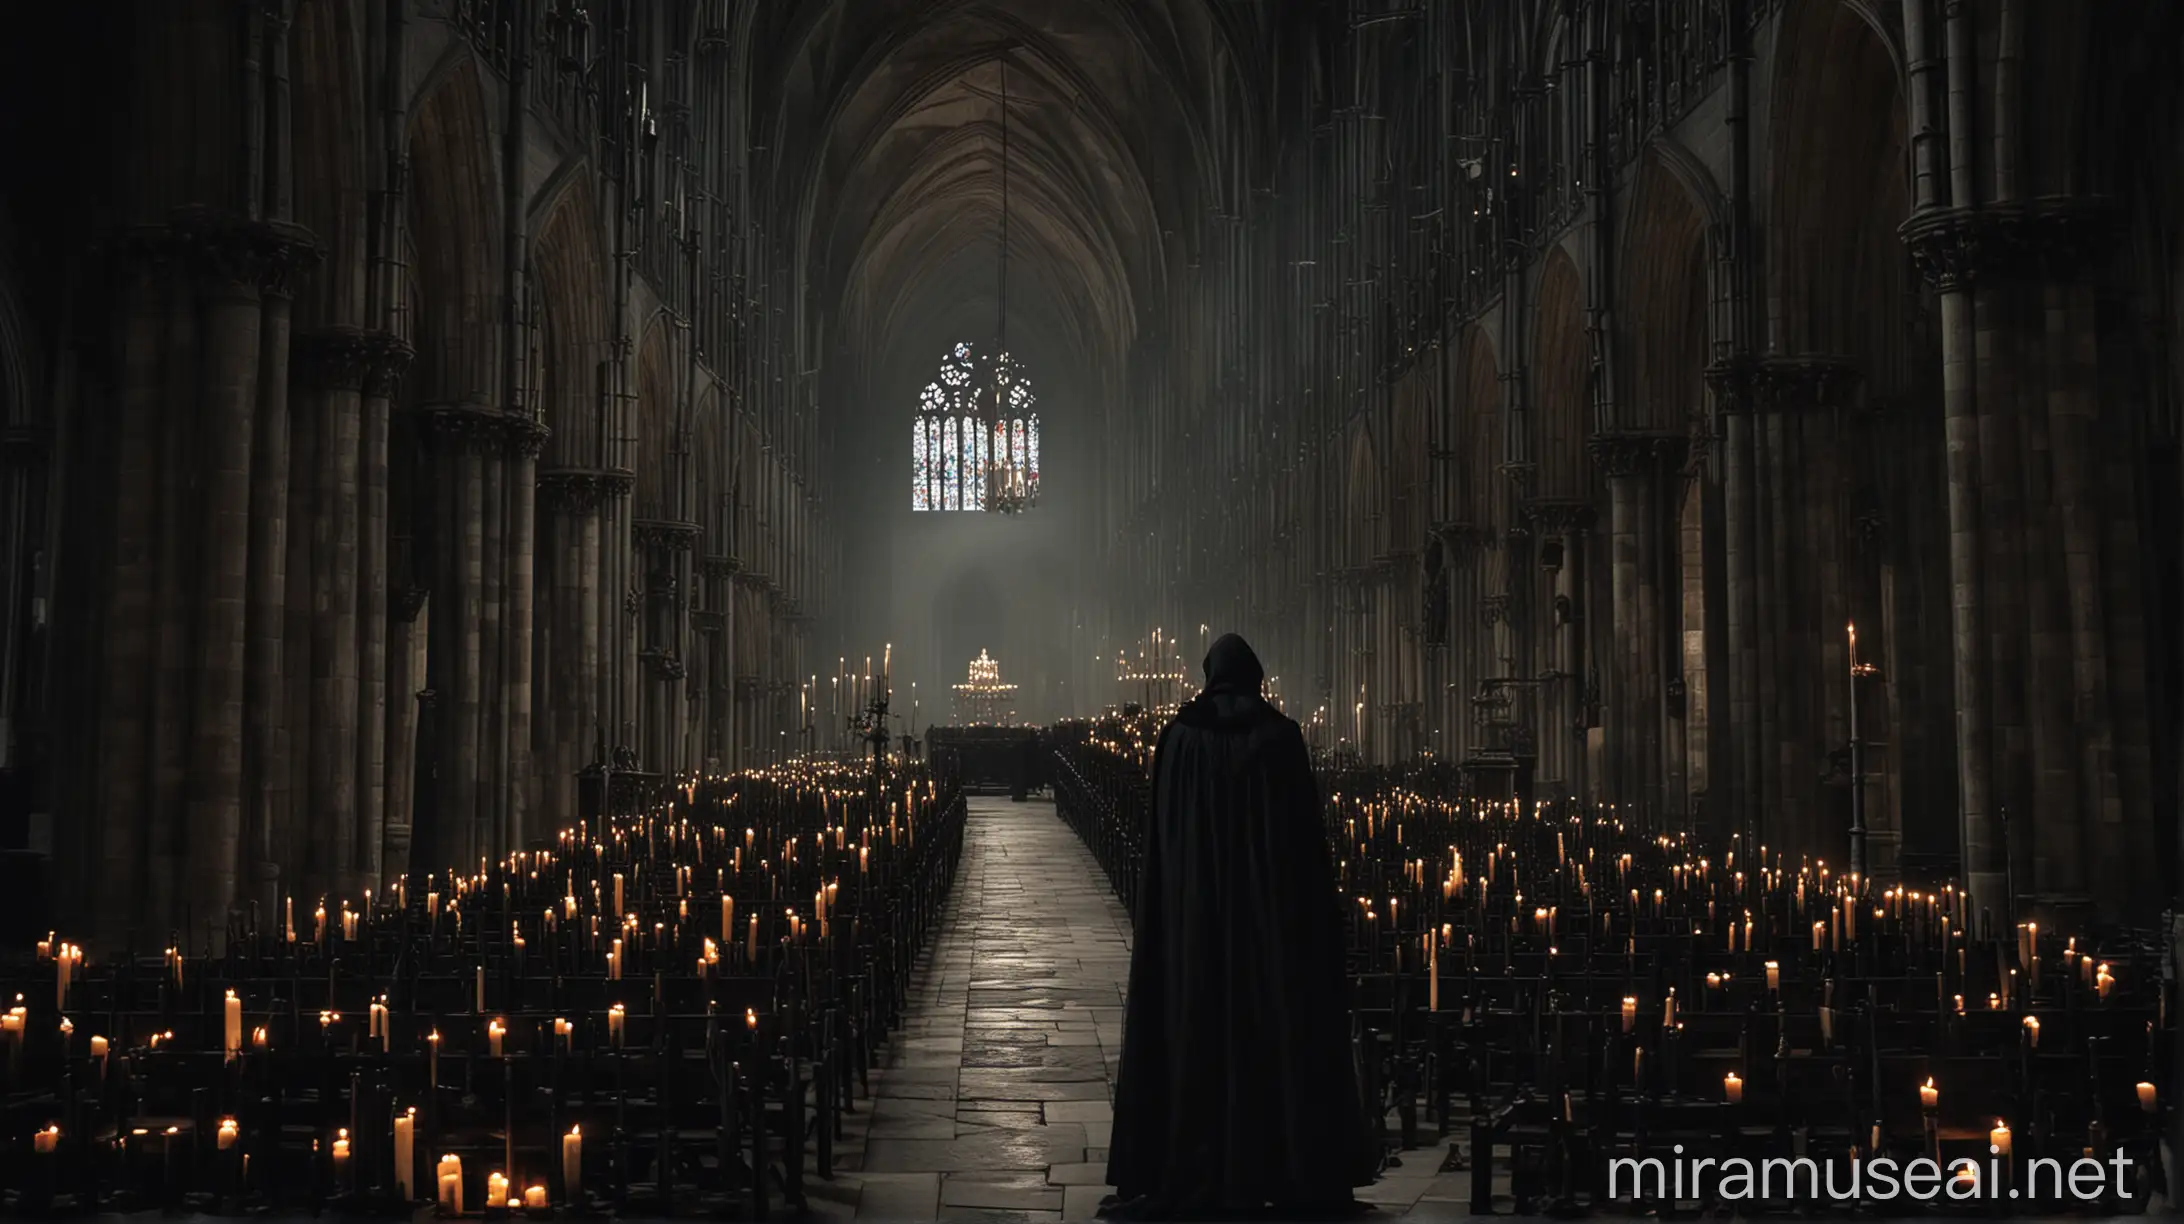 Gothic Cathedral Interior with Candlelit Figures in Cloaks